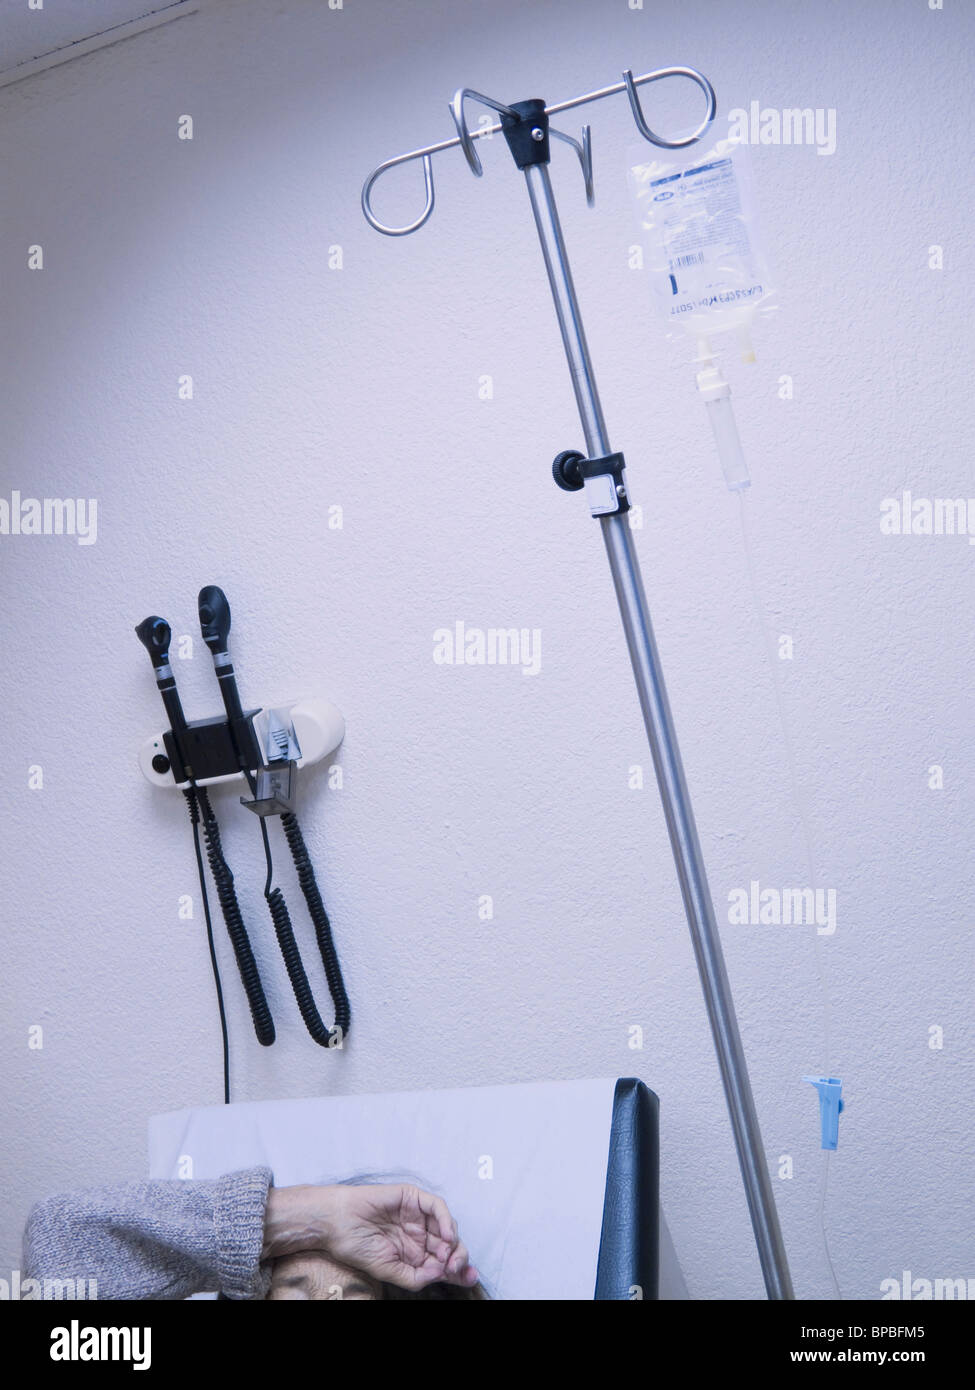 torremolinos, malaga, andalusia, spain; outpatient in a clinic emergency room receiving antibiotic intravenous drip Stock Photo